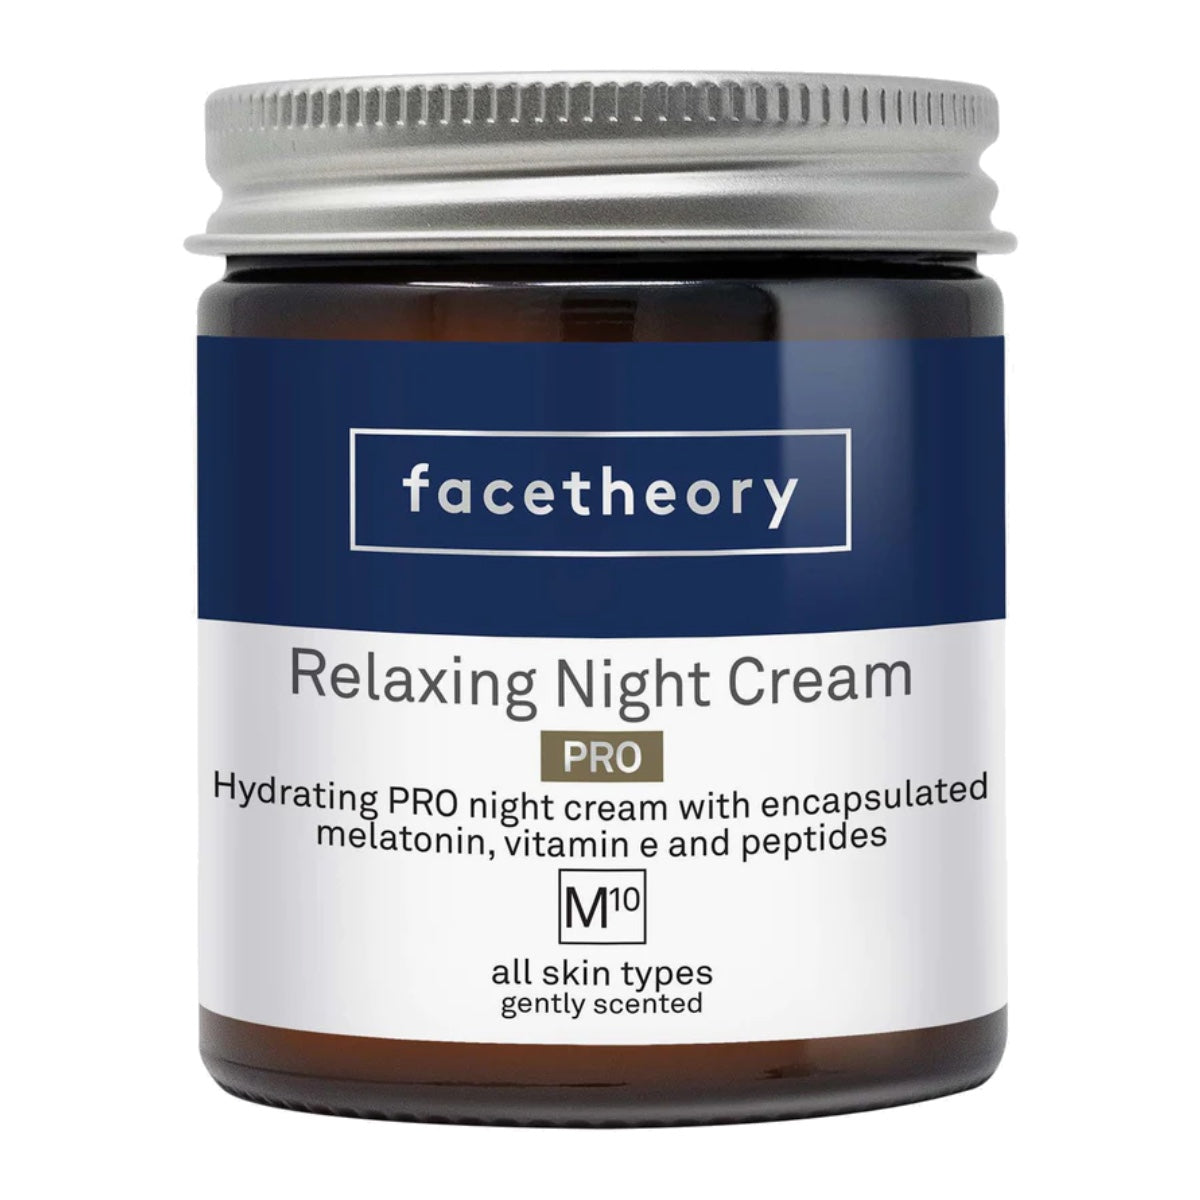 Facetheory Relaxing Night Cream M10 PRO with Encapsulated Melatonin, Vitamin E and Peptides 50 ml